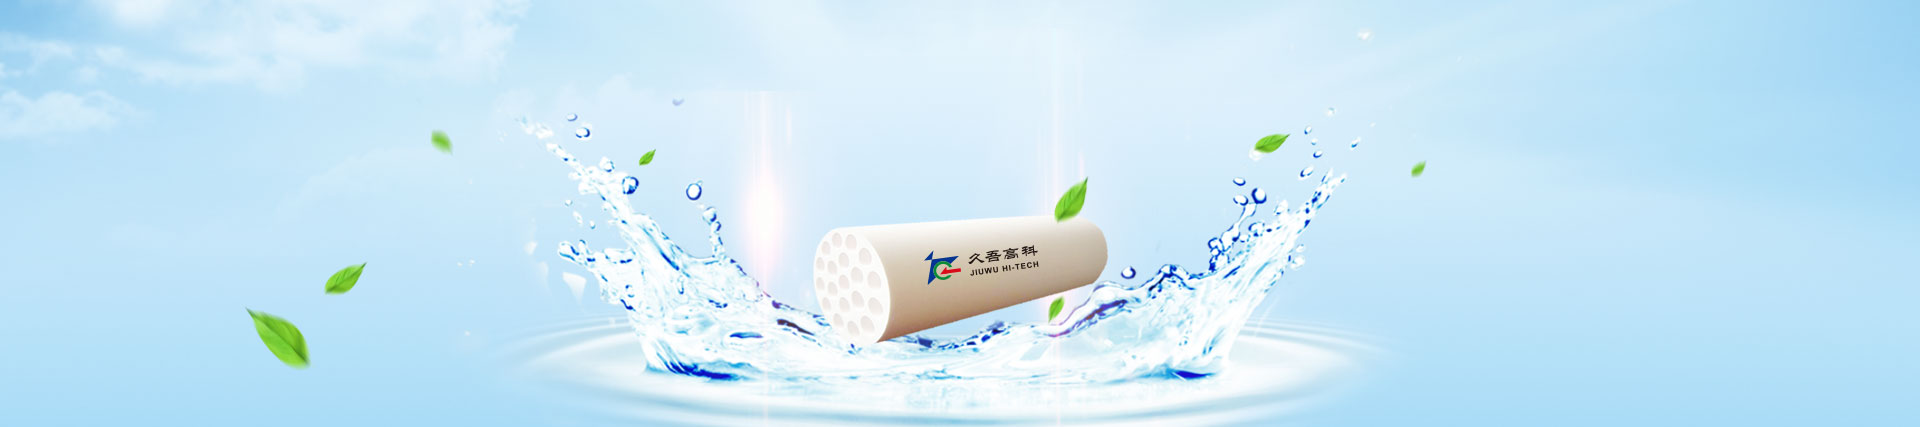 What Are The Advantages Of Ceramic Membrane Module Offered By JIUWU HI-TECH?